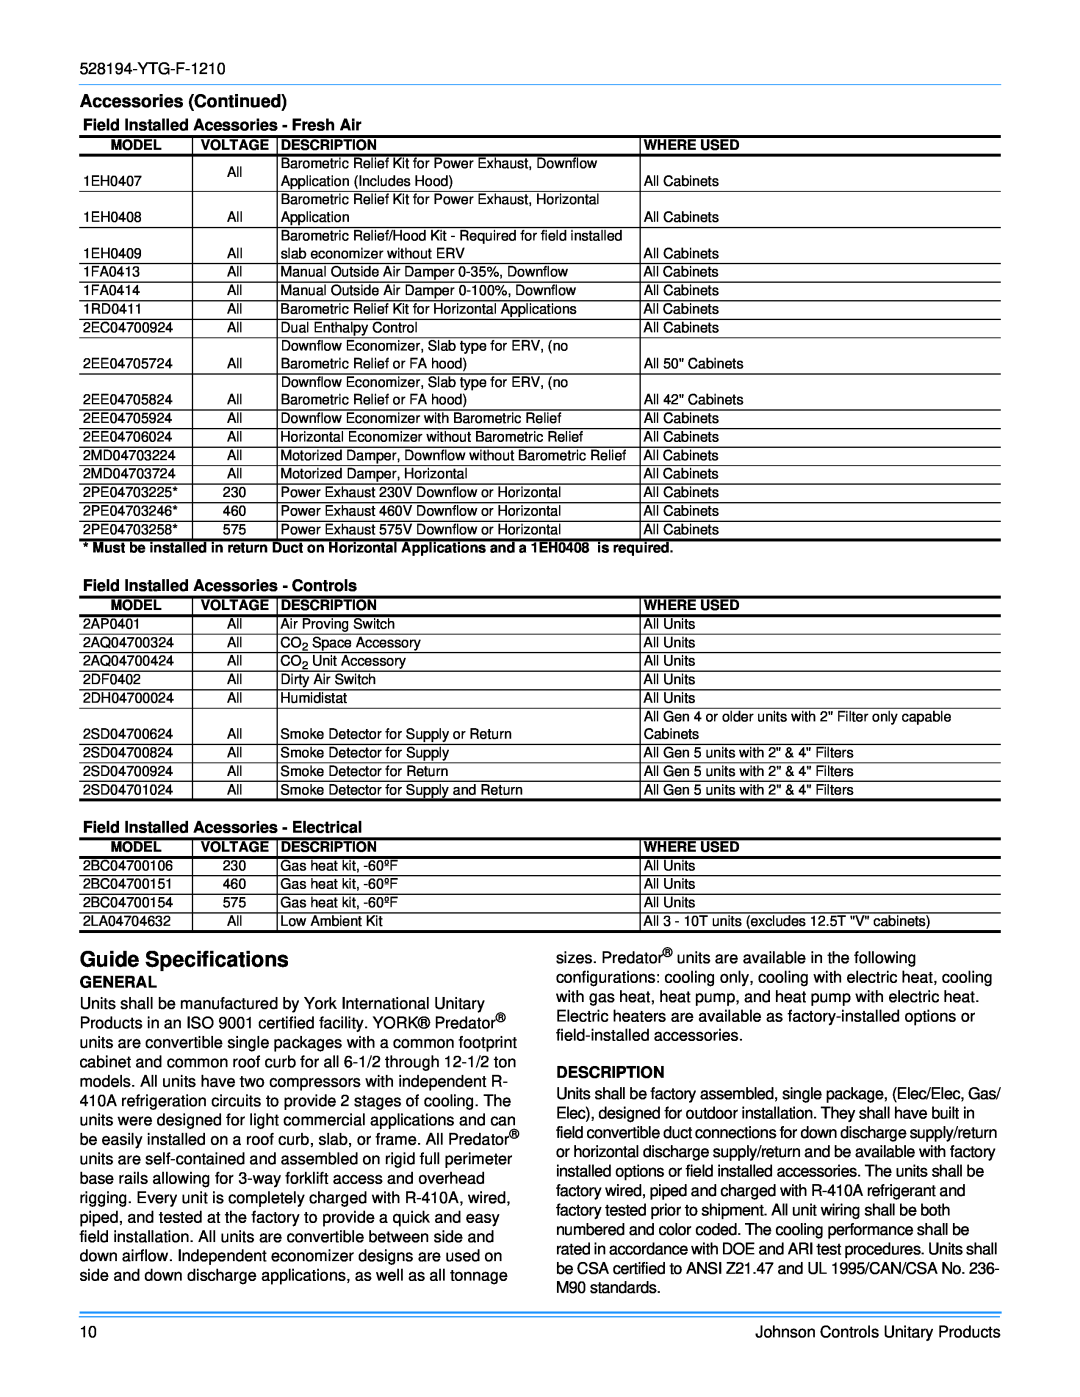 York R-410A manual Guide Specifications, Accessories Continued 